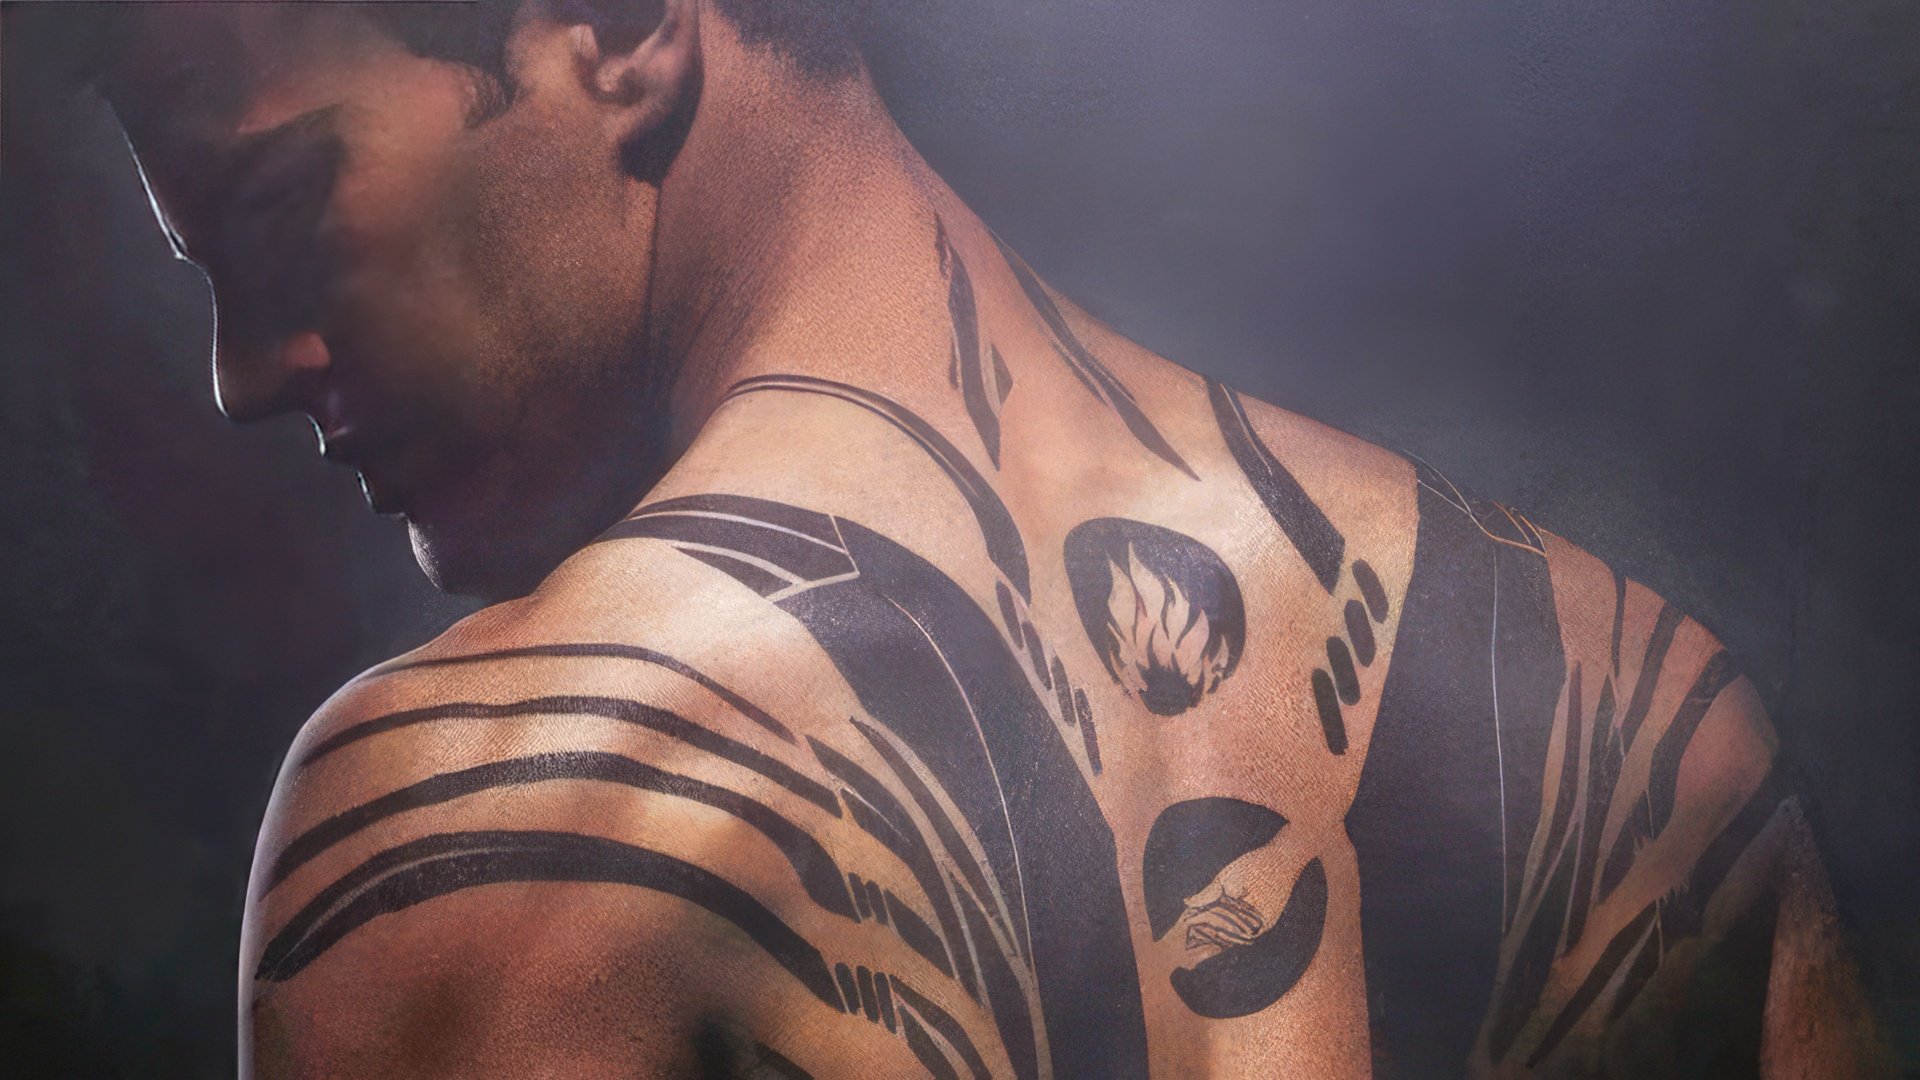 Theo James' Tattoo in the Movie 'Divergent'